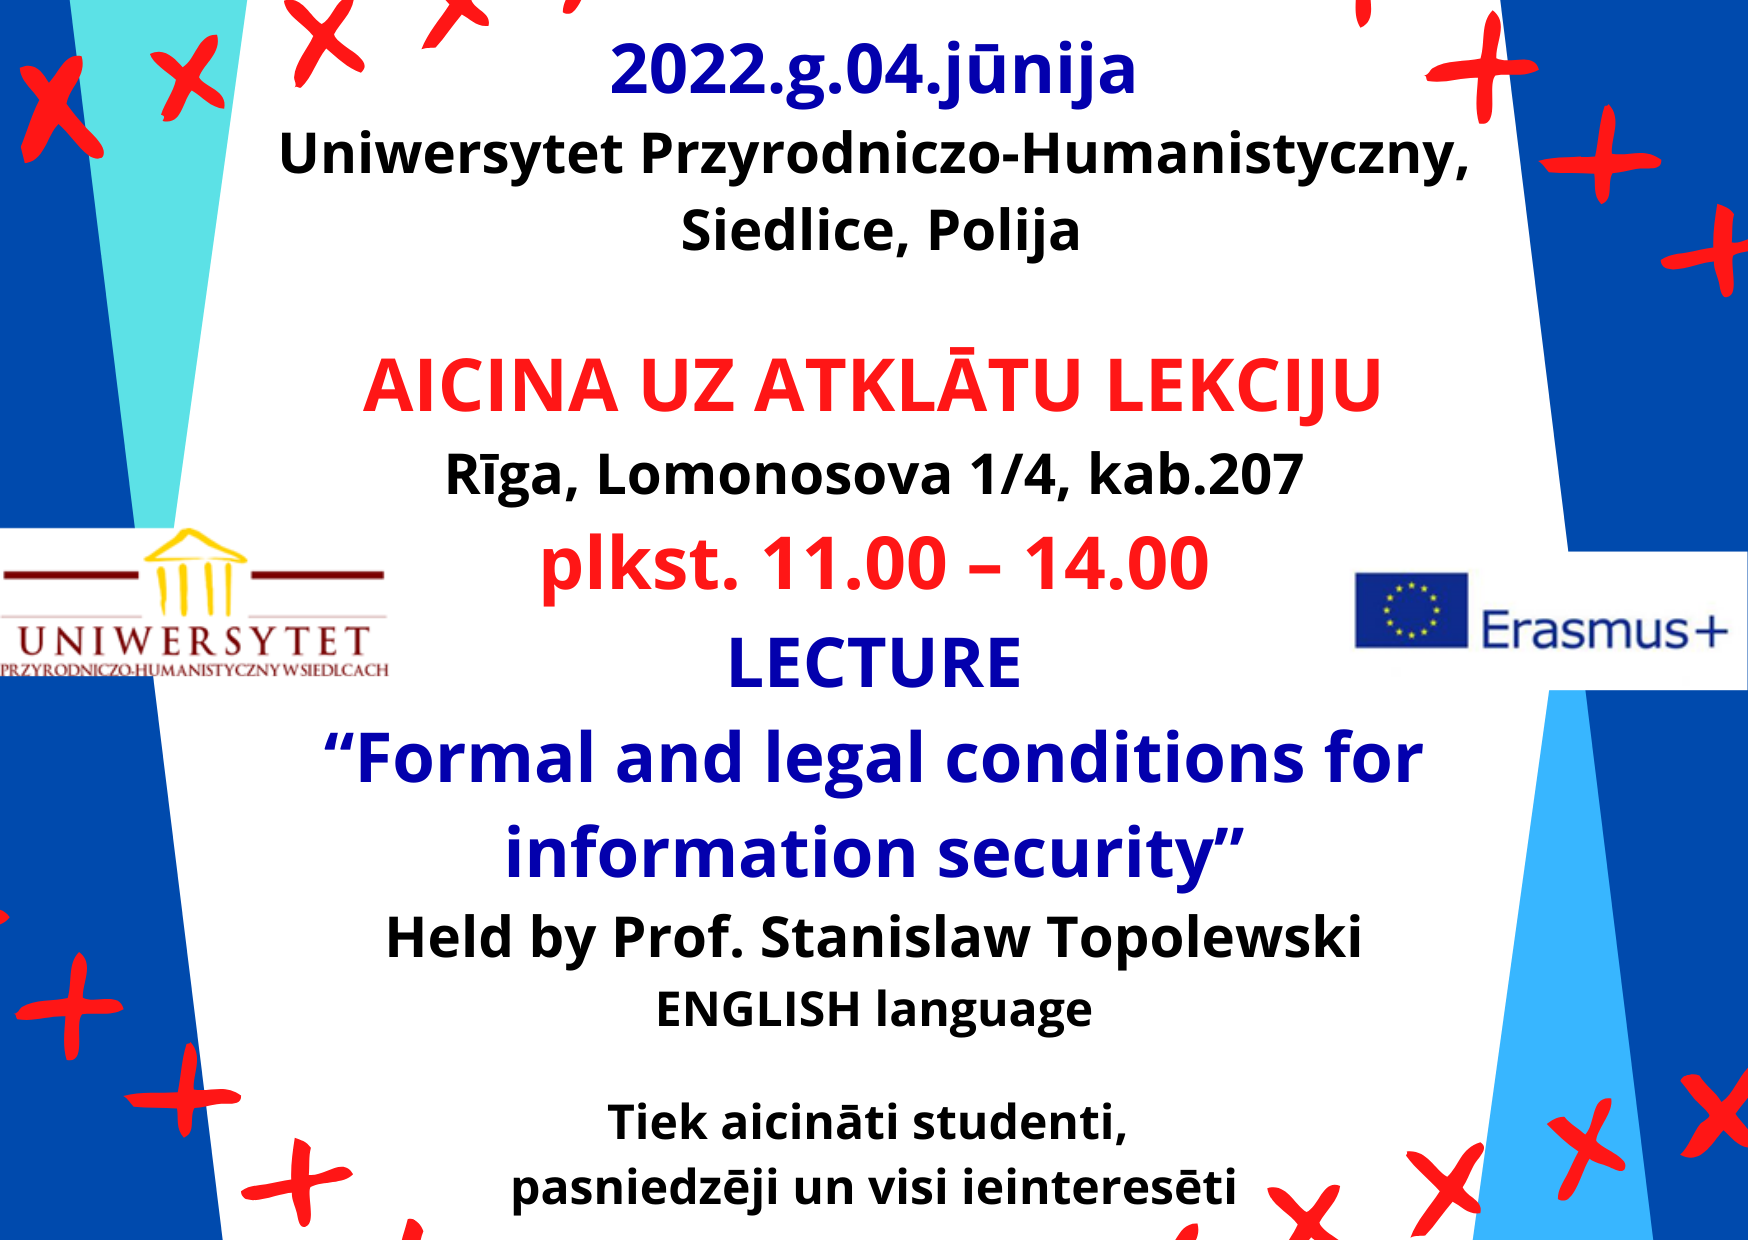 LECTURE “Formal and legal conditions for information security”